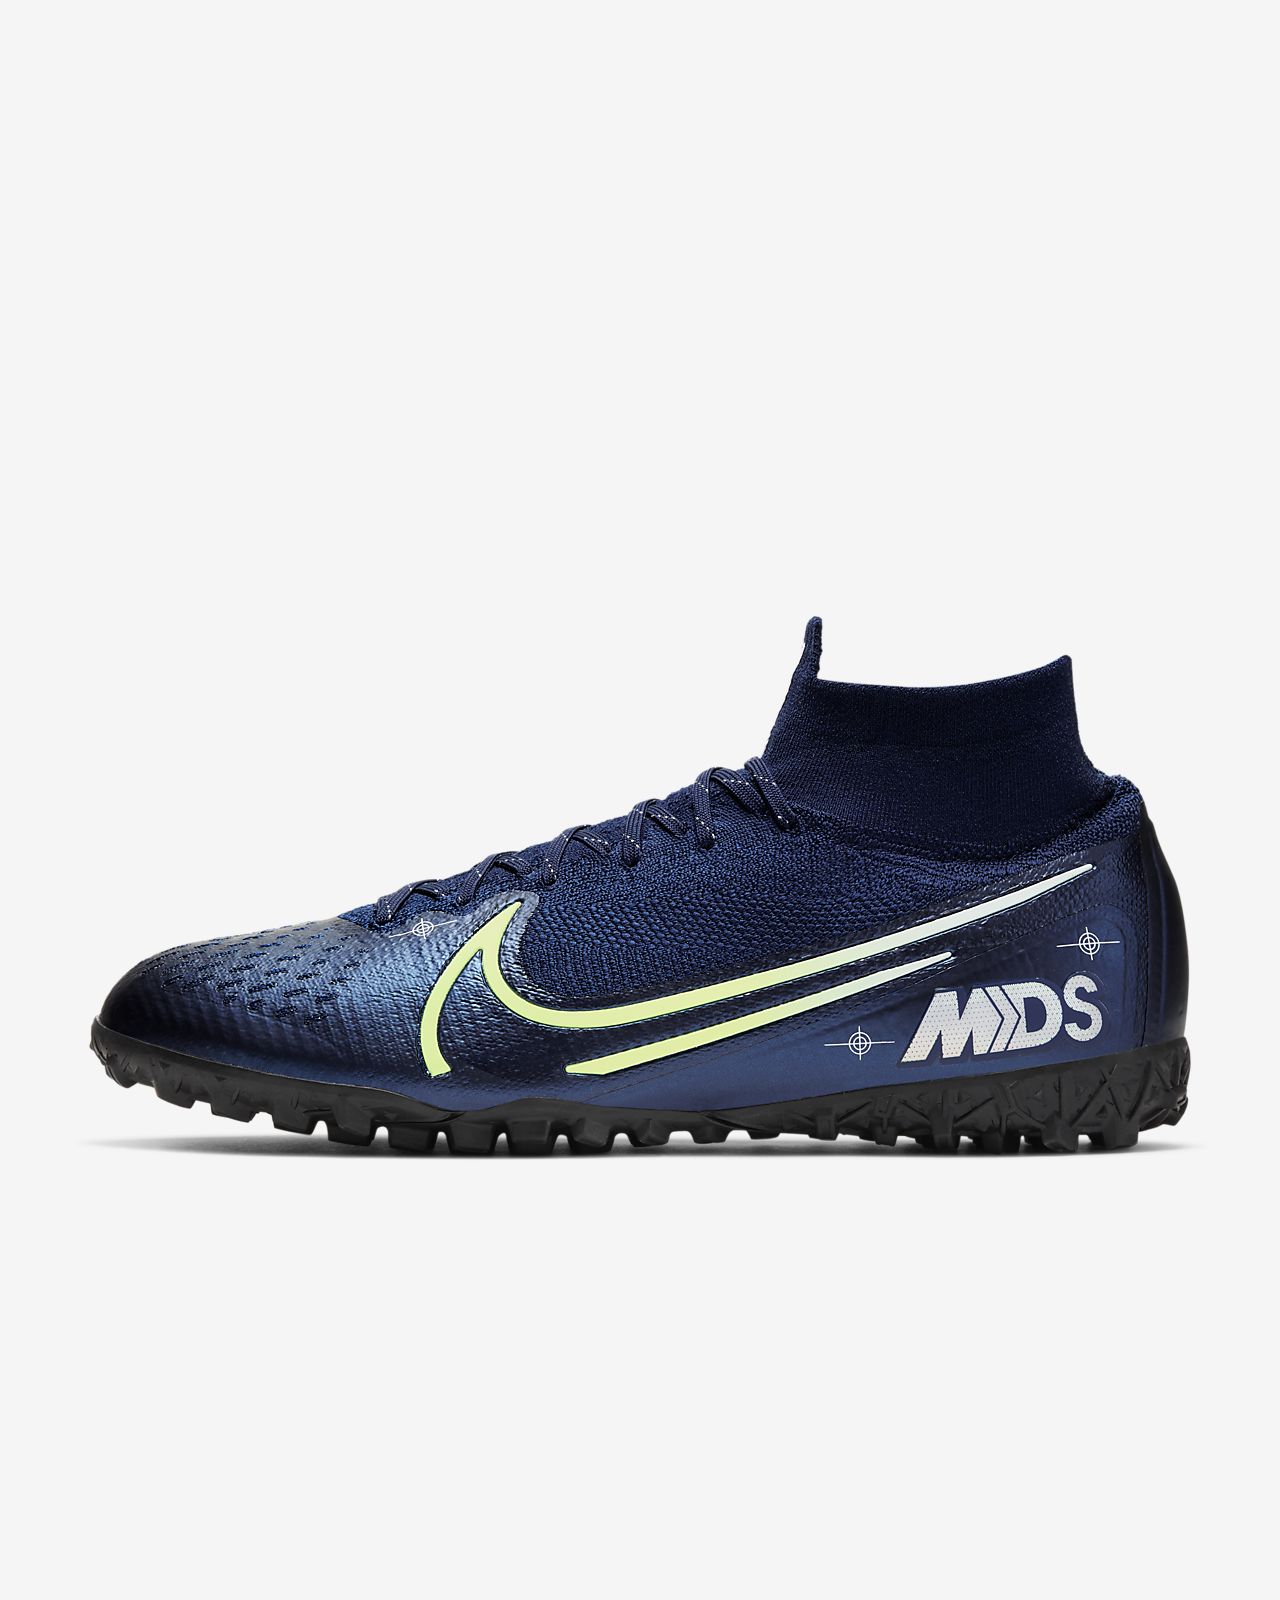 Mercurial Superfly 7 Academy MDS TF PS 'Dream Speed' Goat